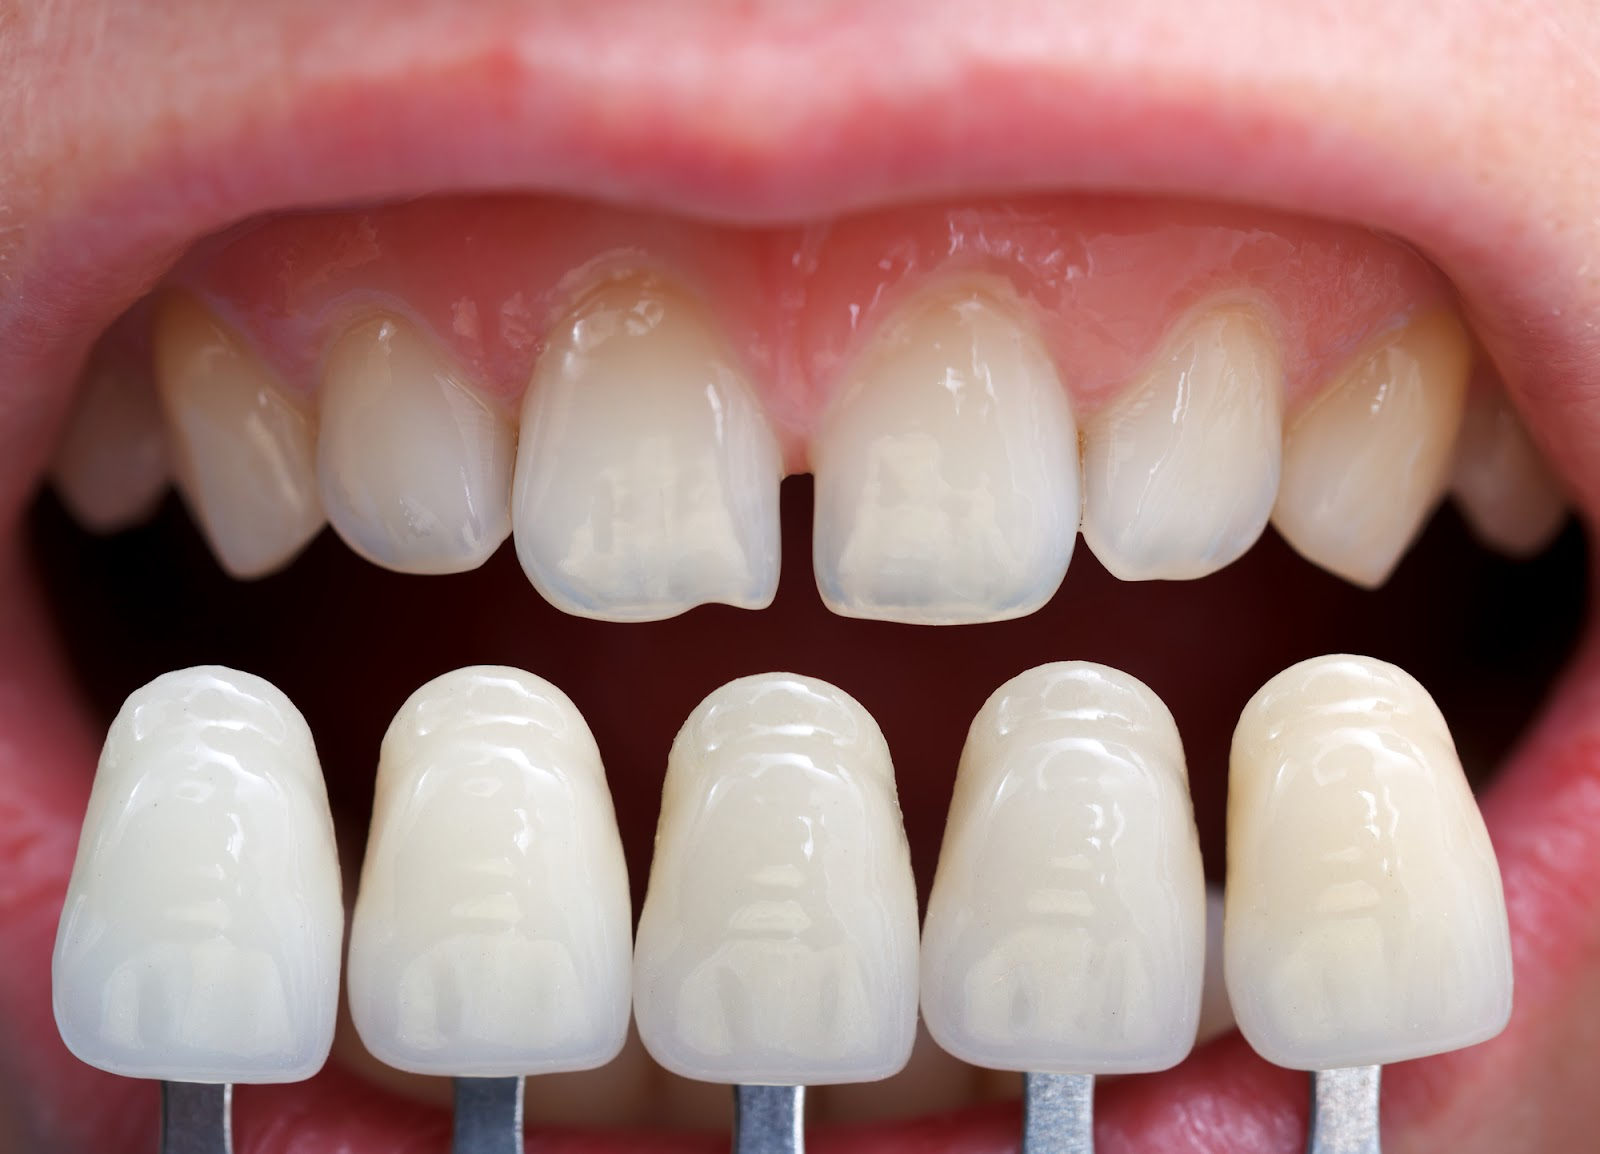 A shade guide helps a dentist in Huntington Beach match veneers to a patient's smile